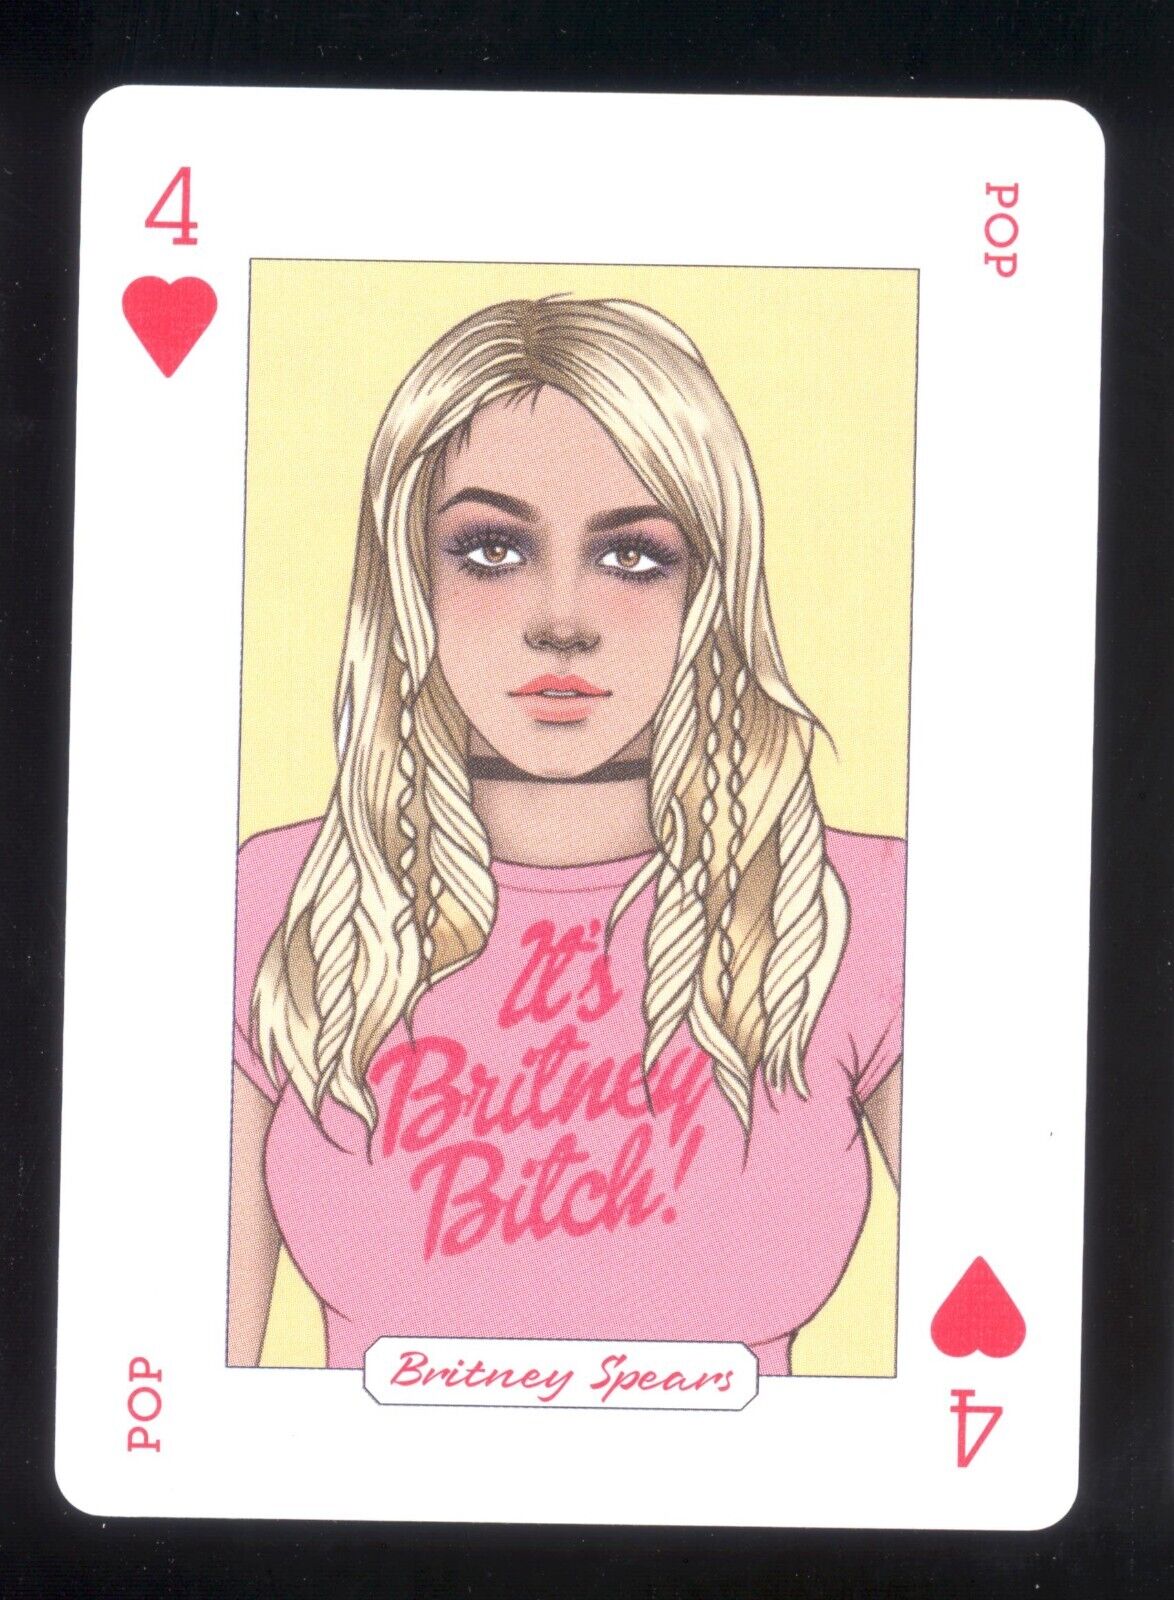 Britney Spears Music Genius Playing Trading Card 2018 Mint Condition